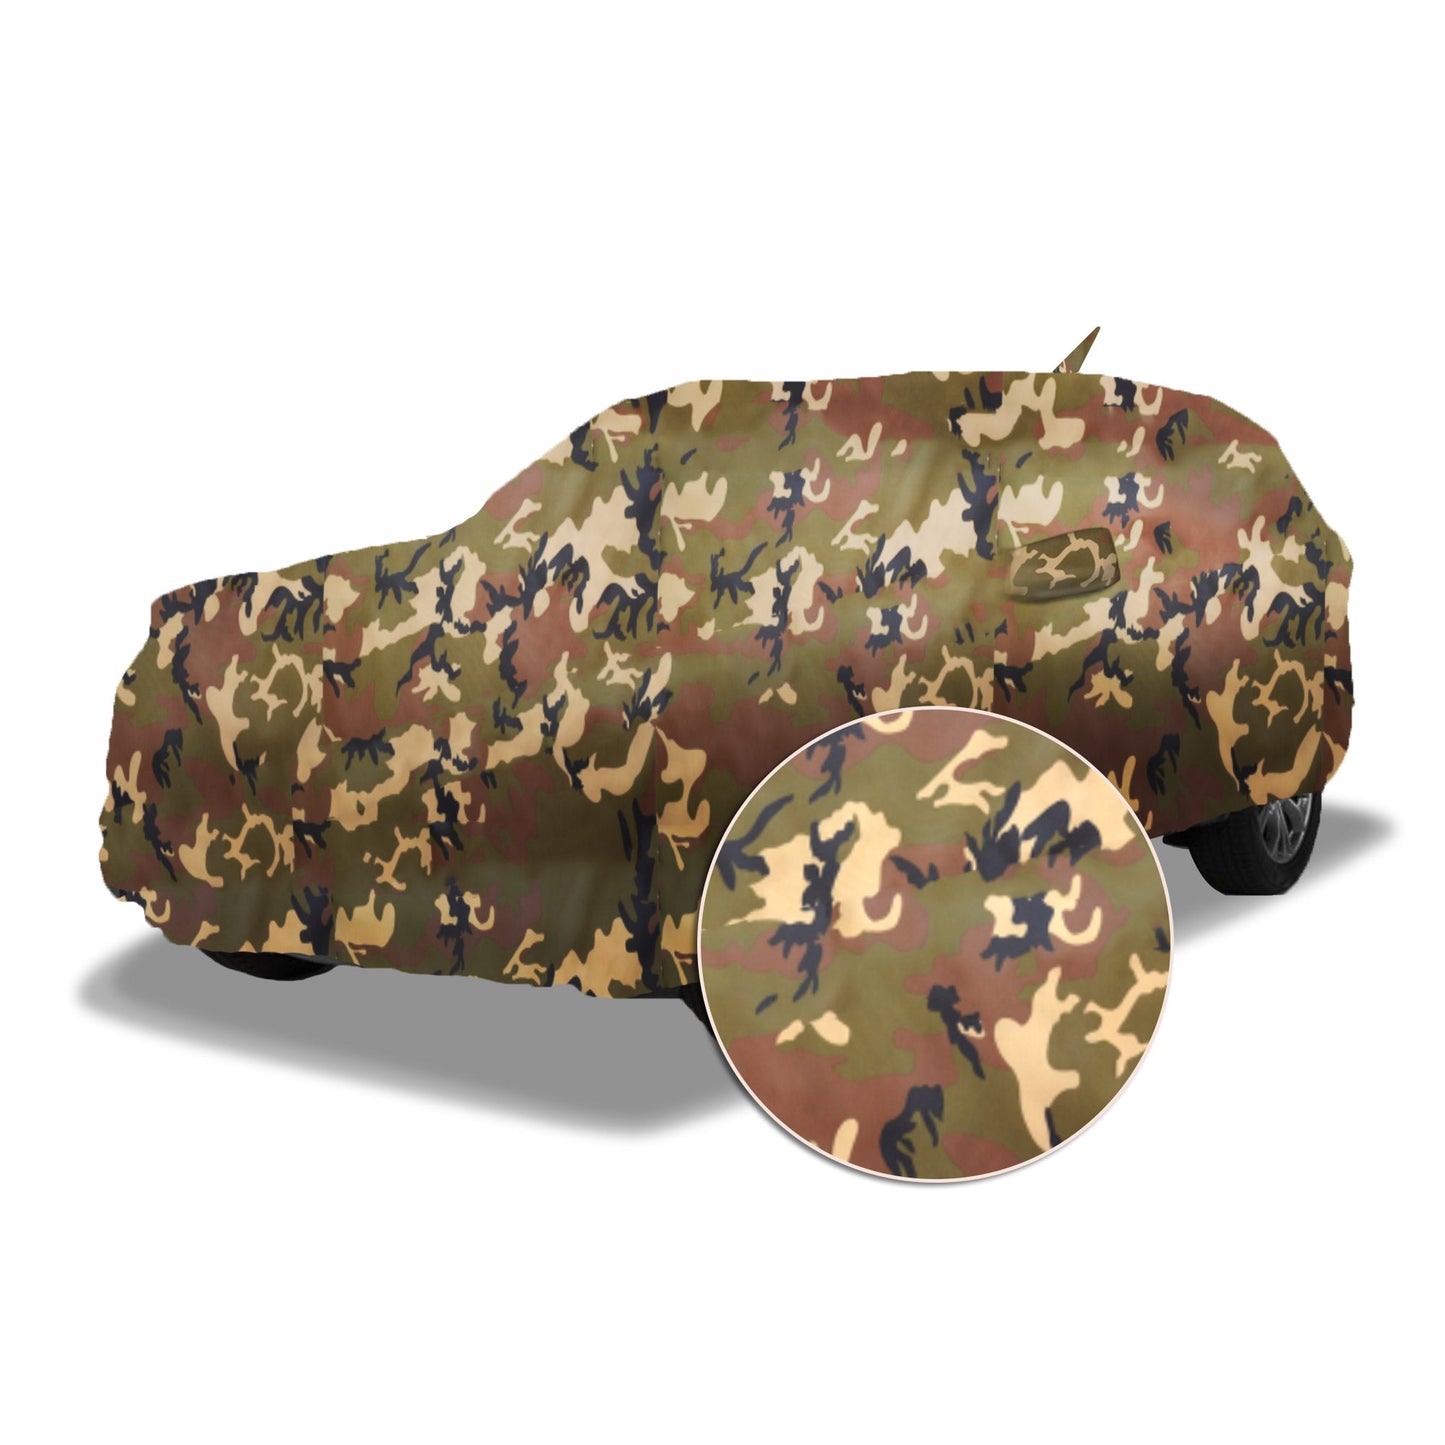 Ascot Toyota Urban Cruiser Car Body Cover Extra Strong & Dust Proof Jungle Military Car Cover with UV Proof & Water-Resistant Coating